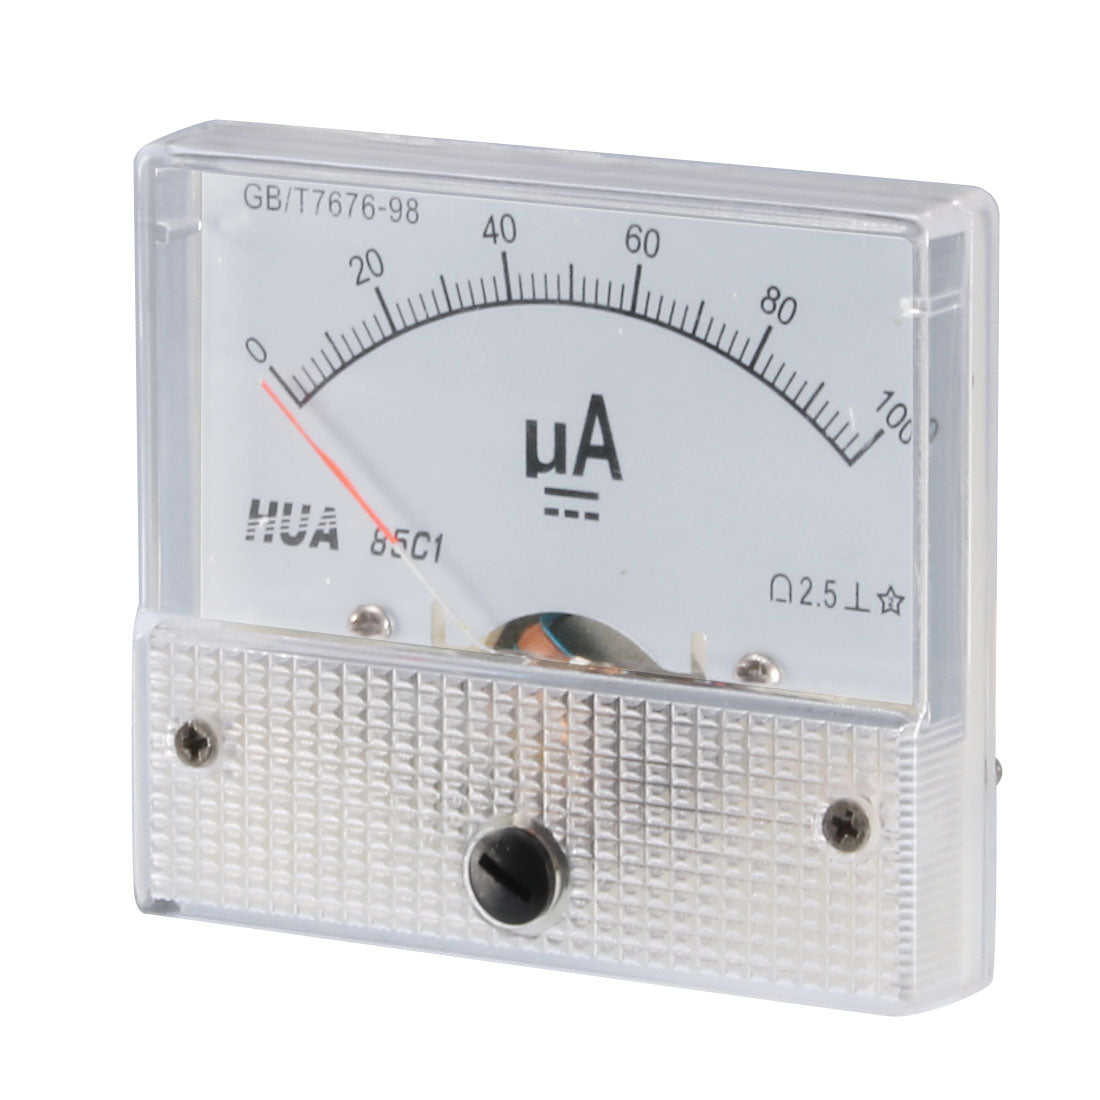 uxcell Uxcell Class 2.5 Accuracy DC 0-100uA Analogue Display Ammeter 85C1-uA